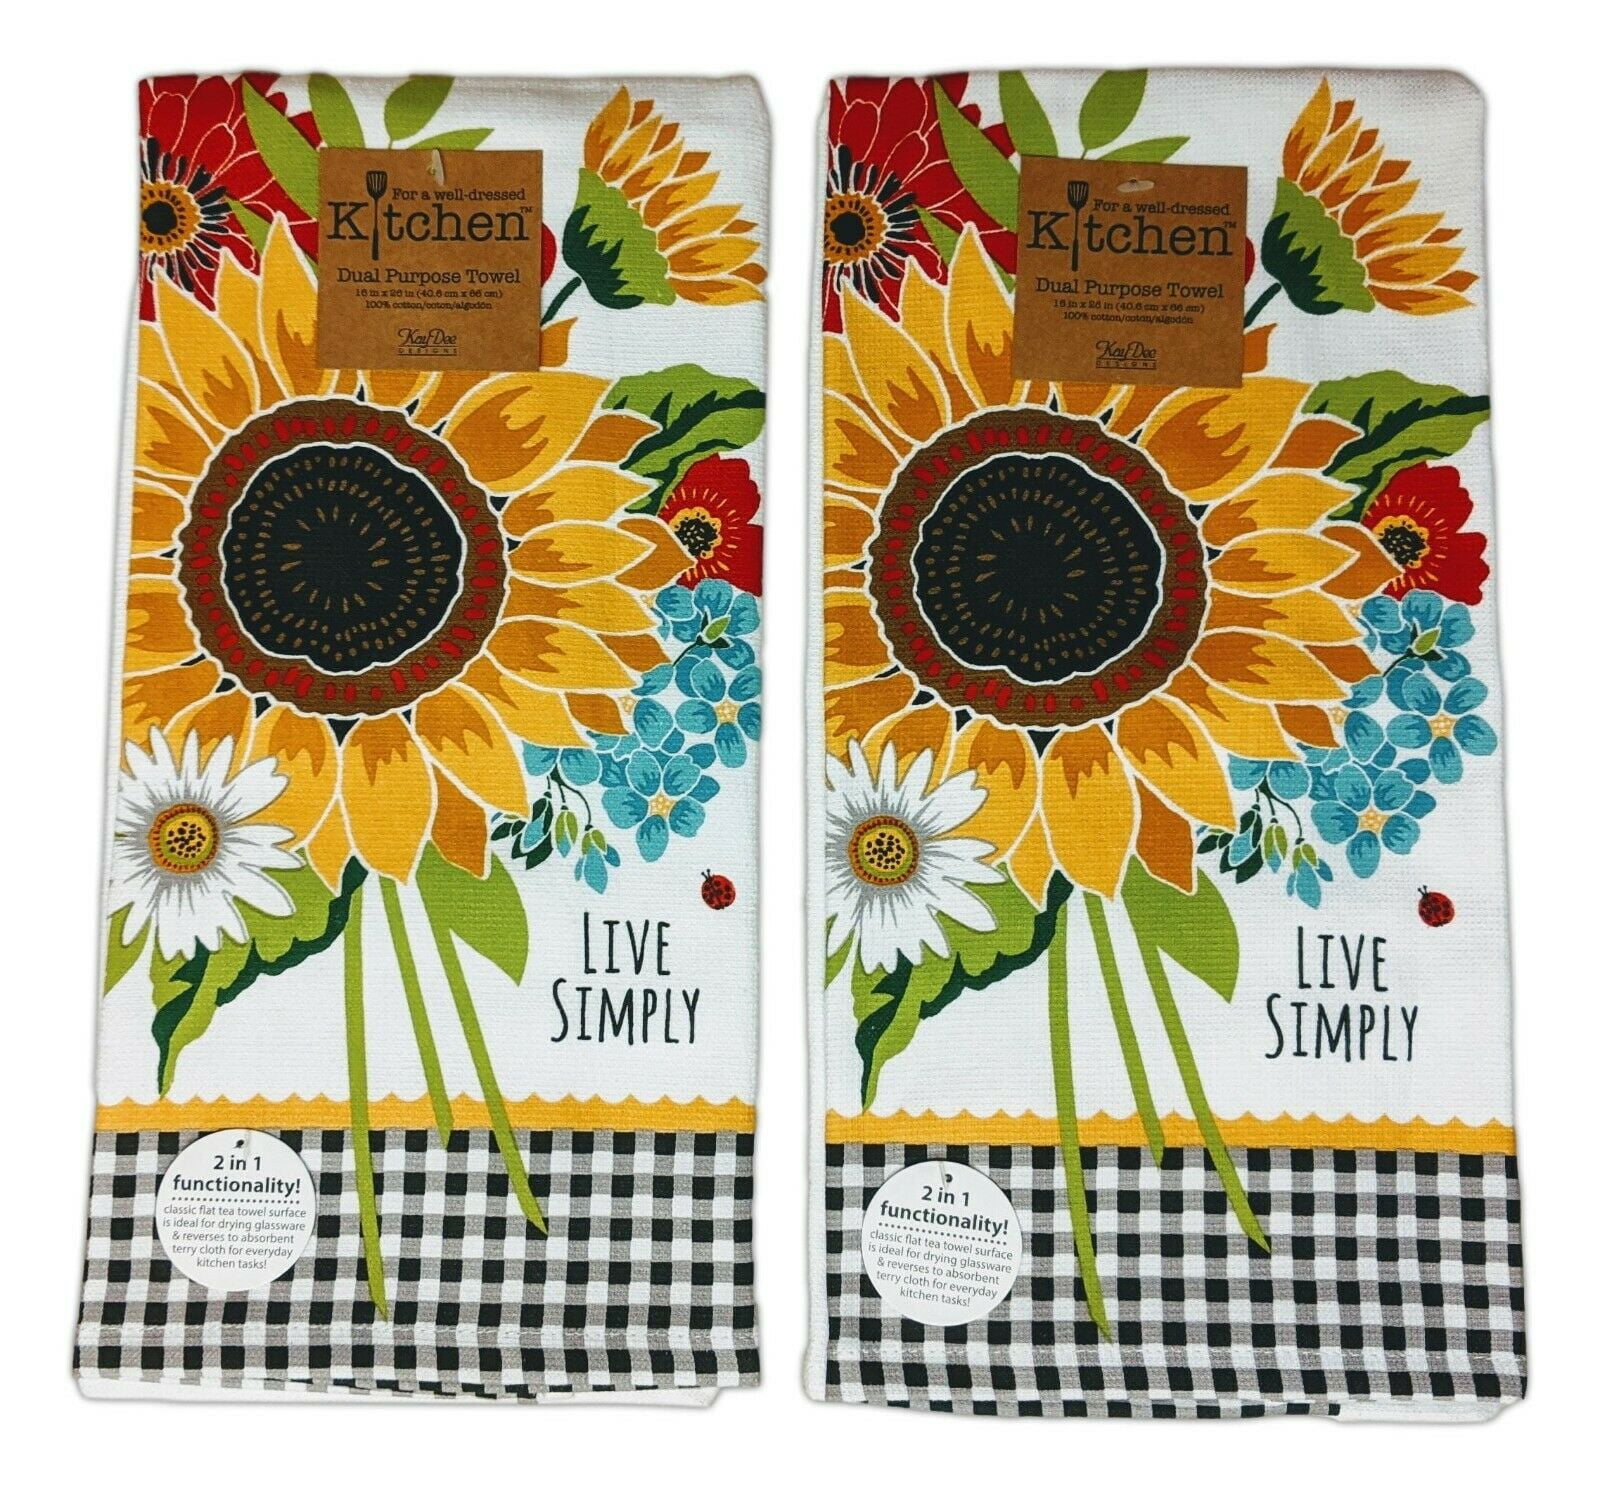 2 HANGING KITCHEN TOWELS LIVE SIMPLY.SUNFLOWERS IN CANNING JARS 